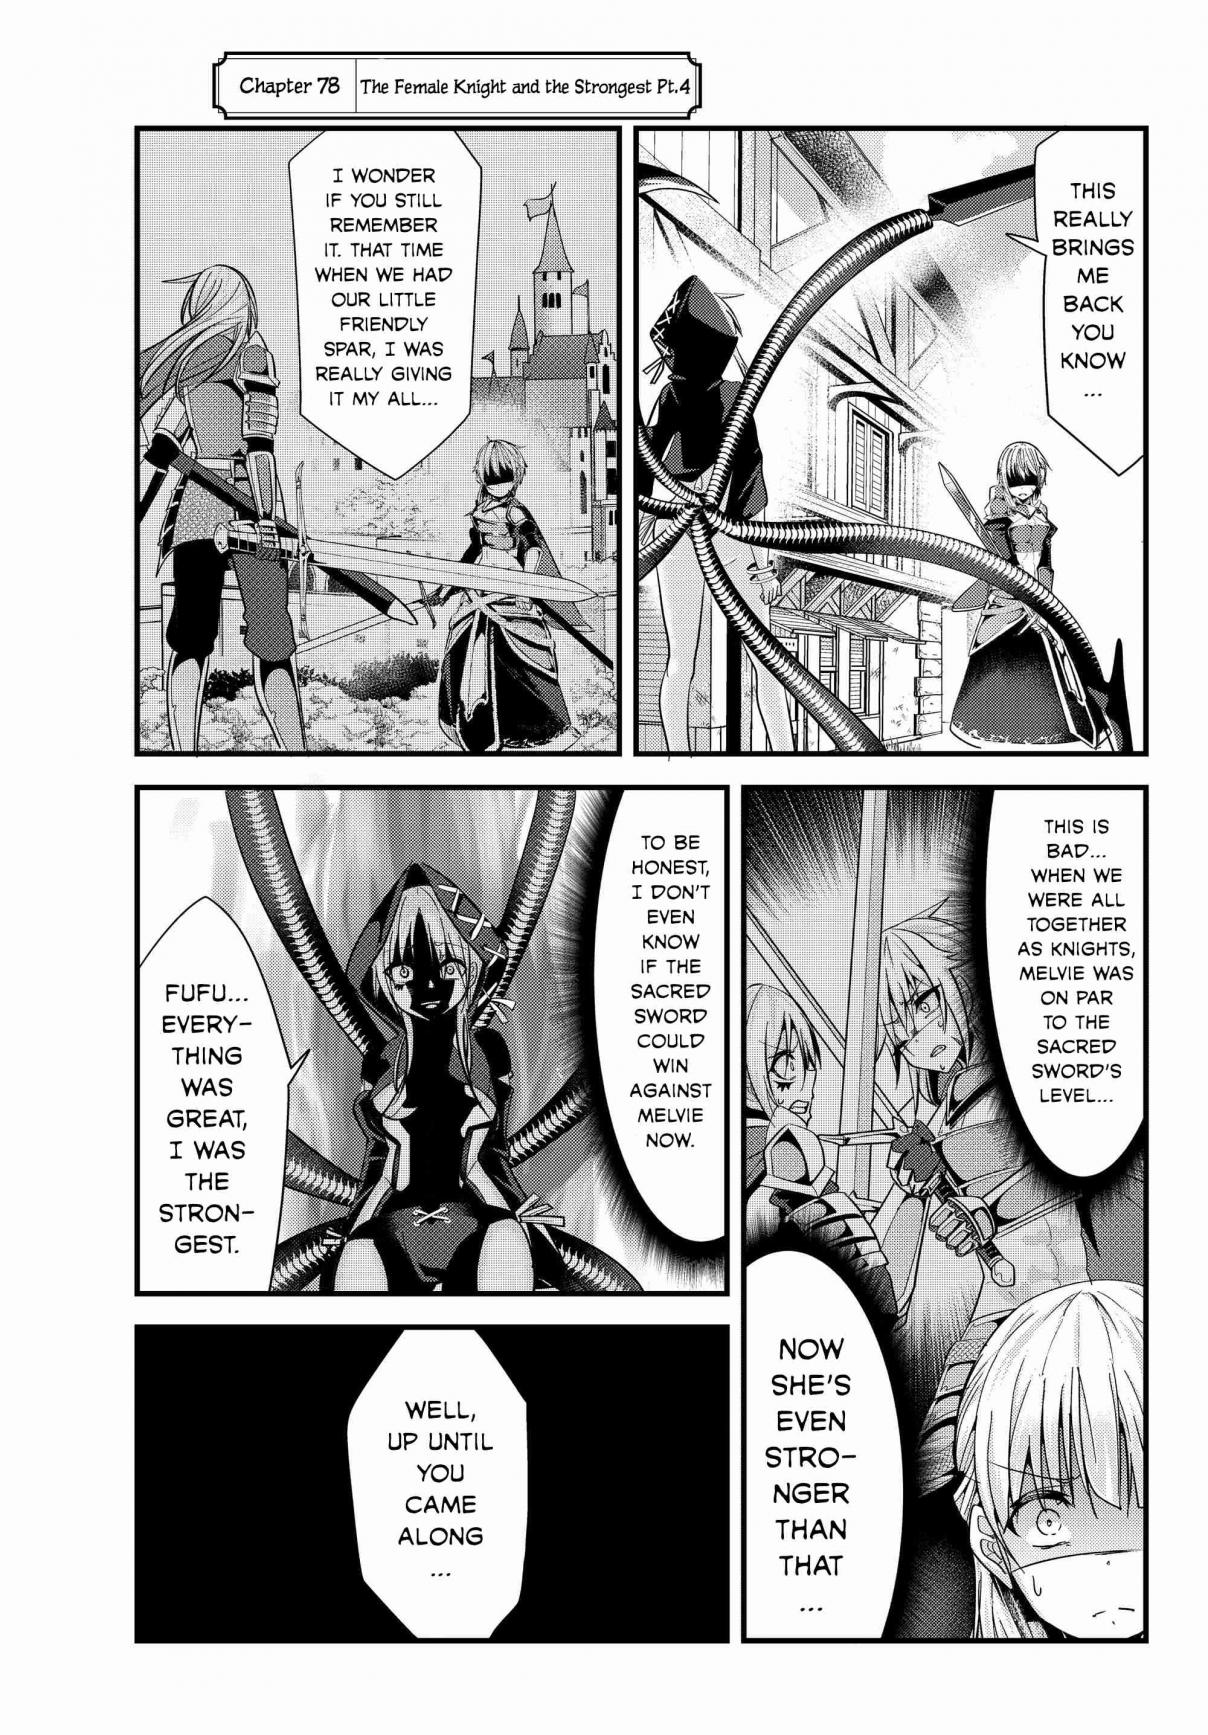 A Story About Treating a Female Knight, Who Has Never Been Treated as a Woman, as a Woman Ch. 78 The Female Knight and the Strongest Pt.4